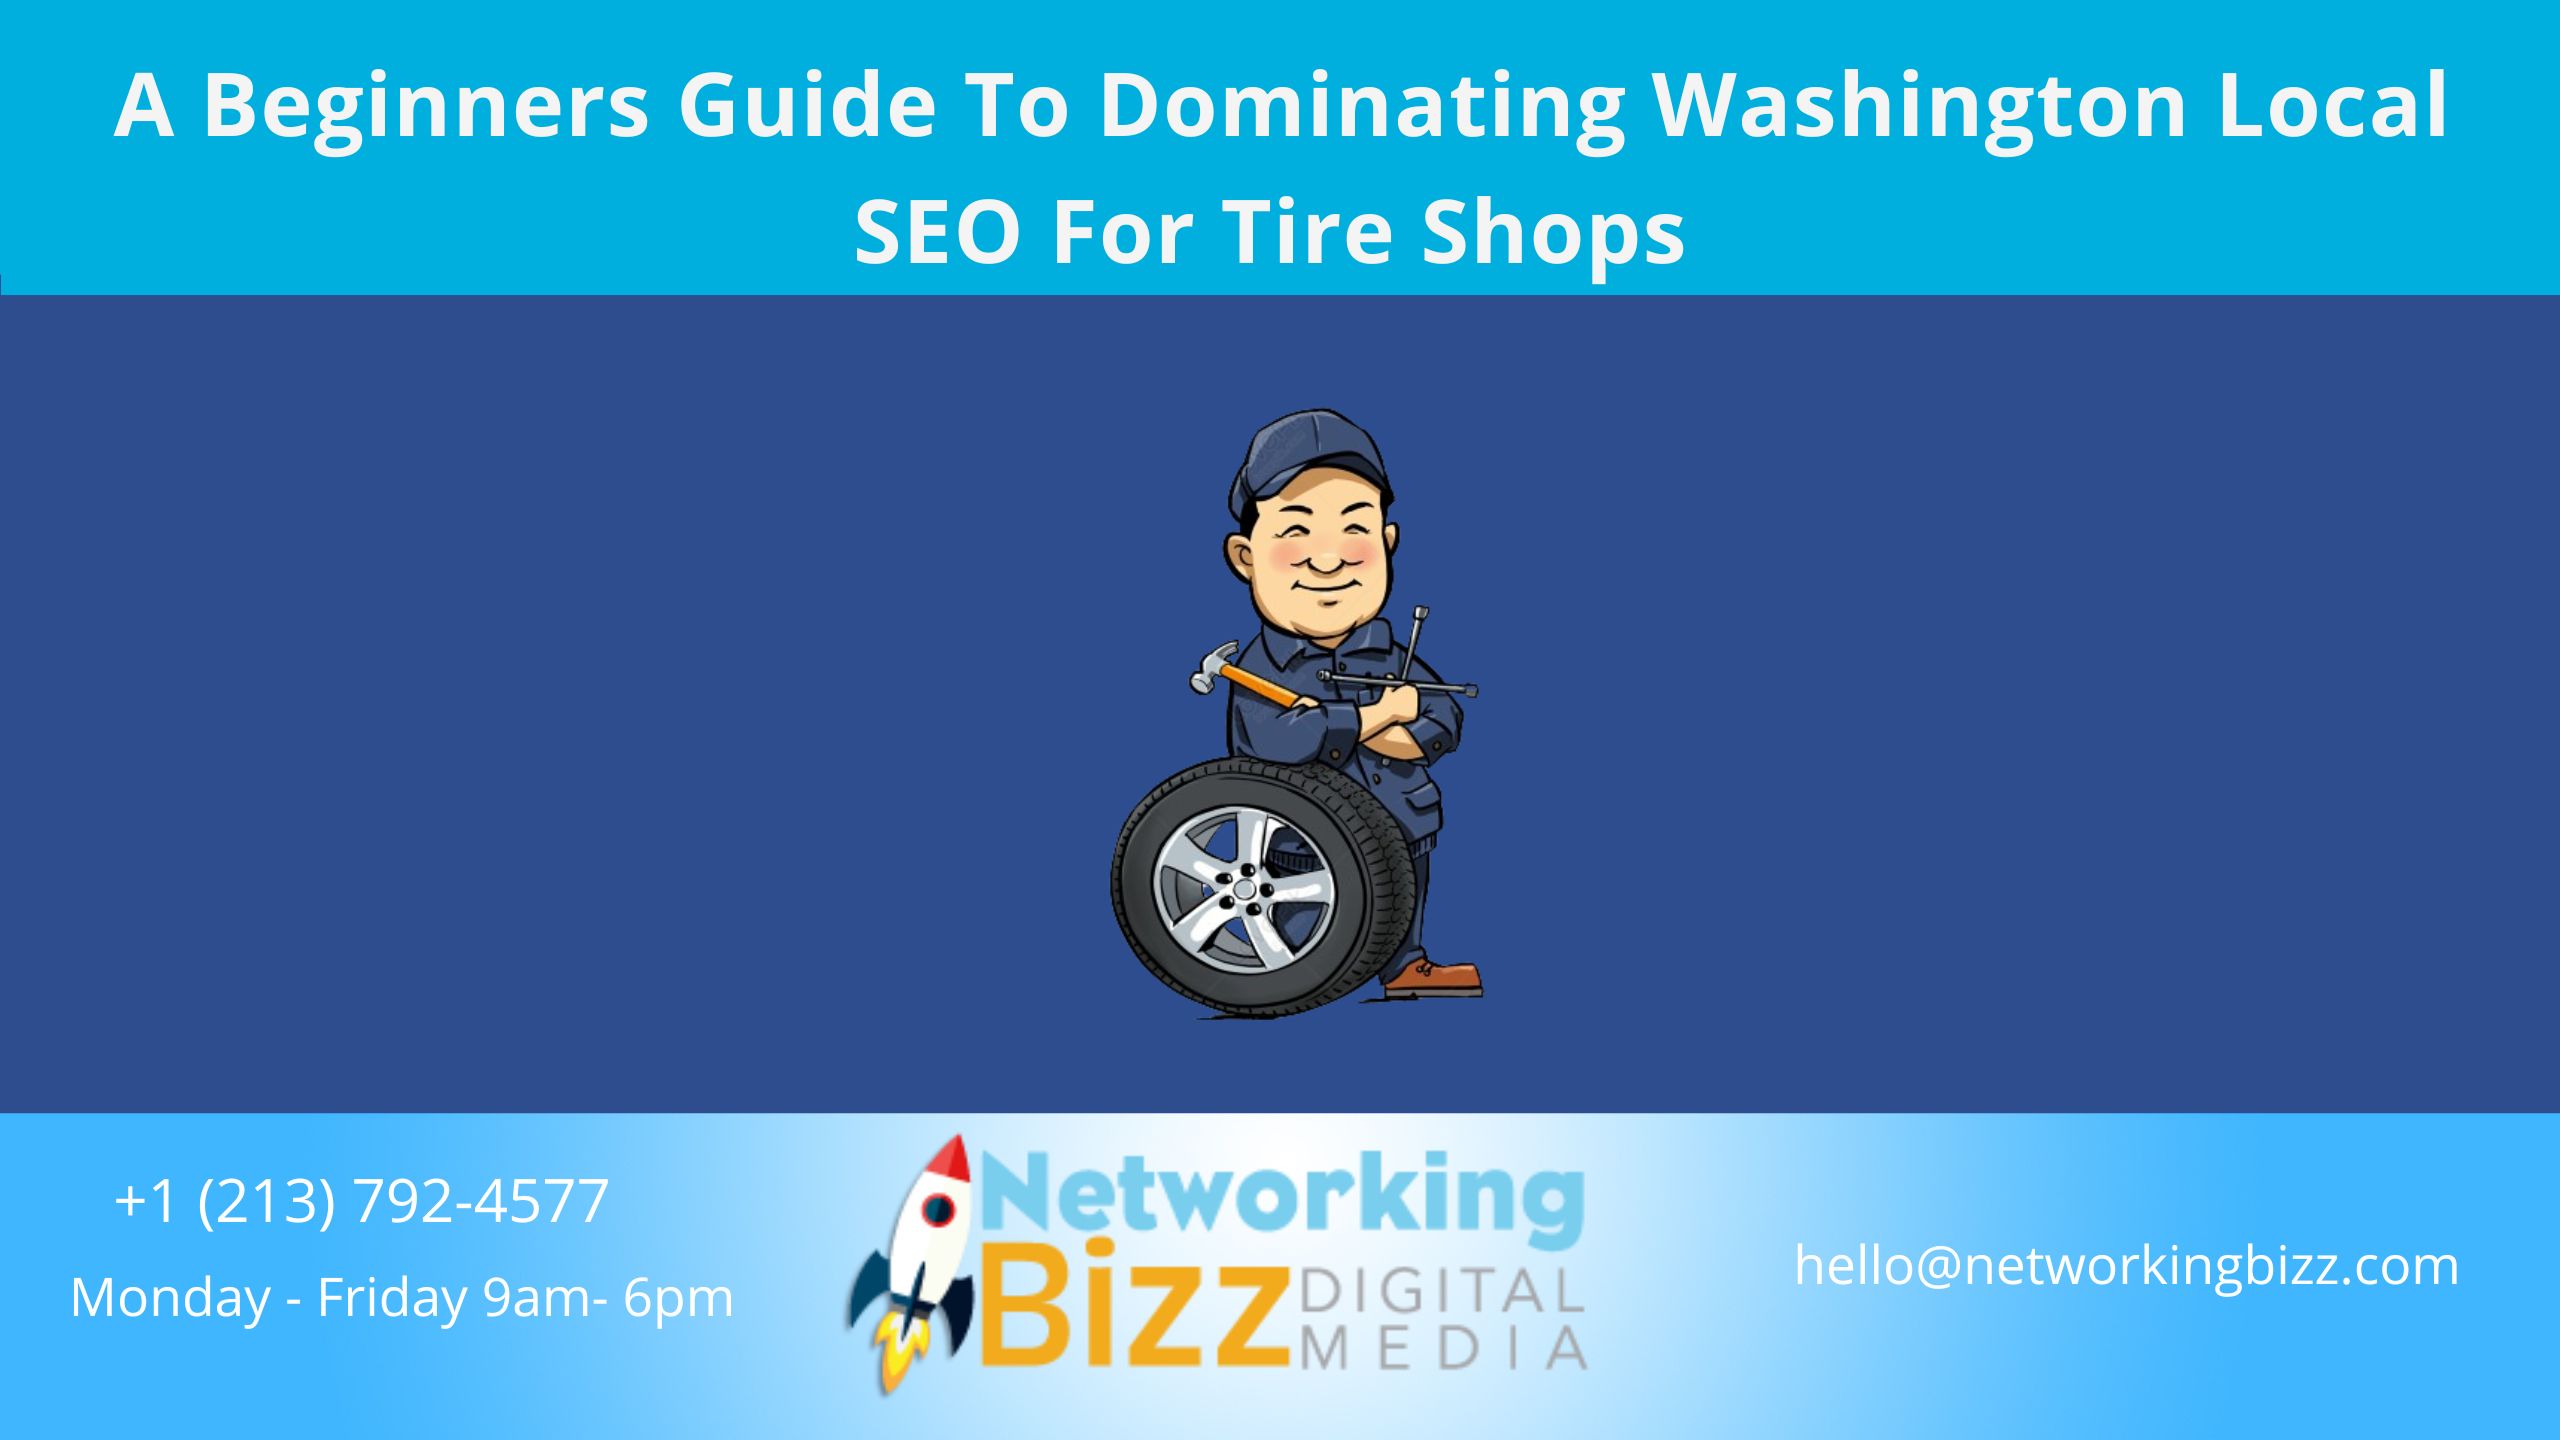  A Beginners Guide To Dominating Washington Local SEO For Tire Shops